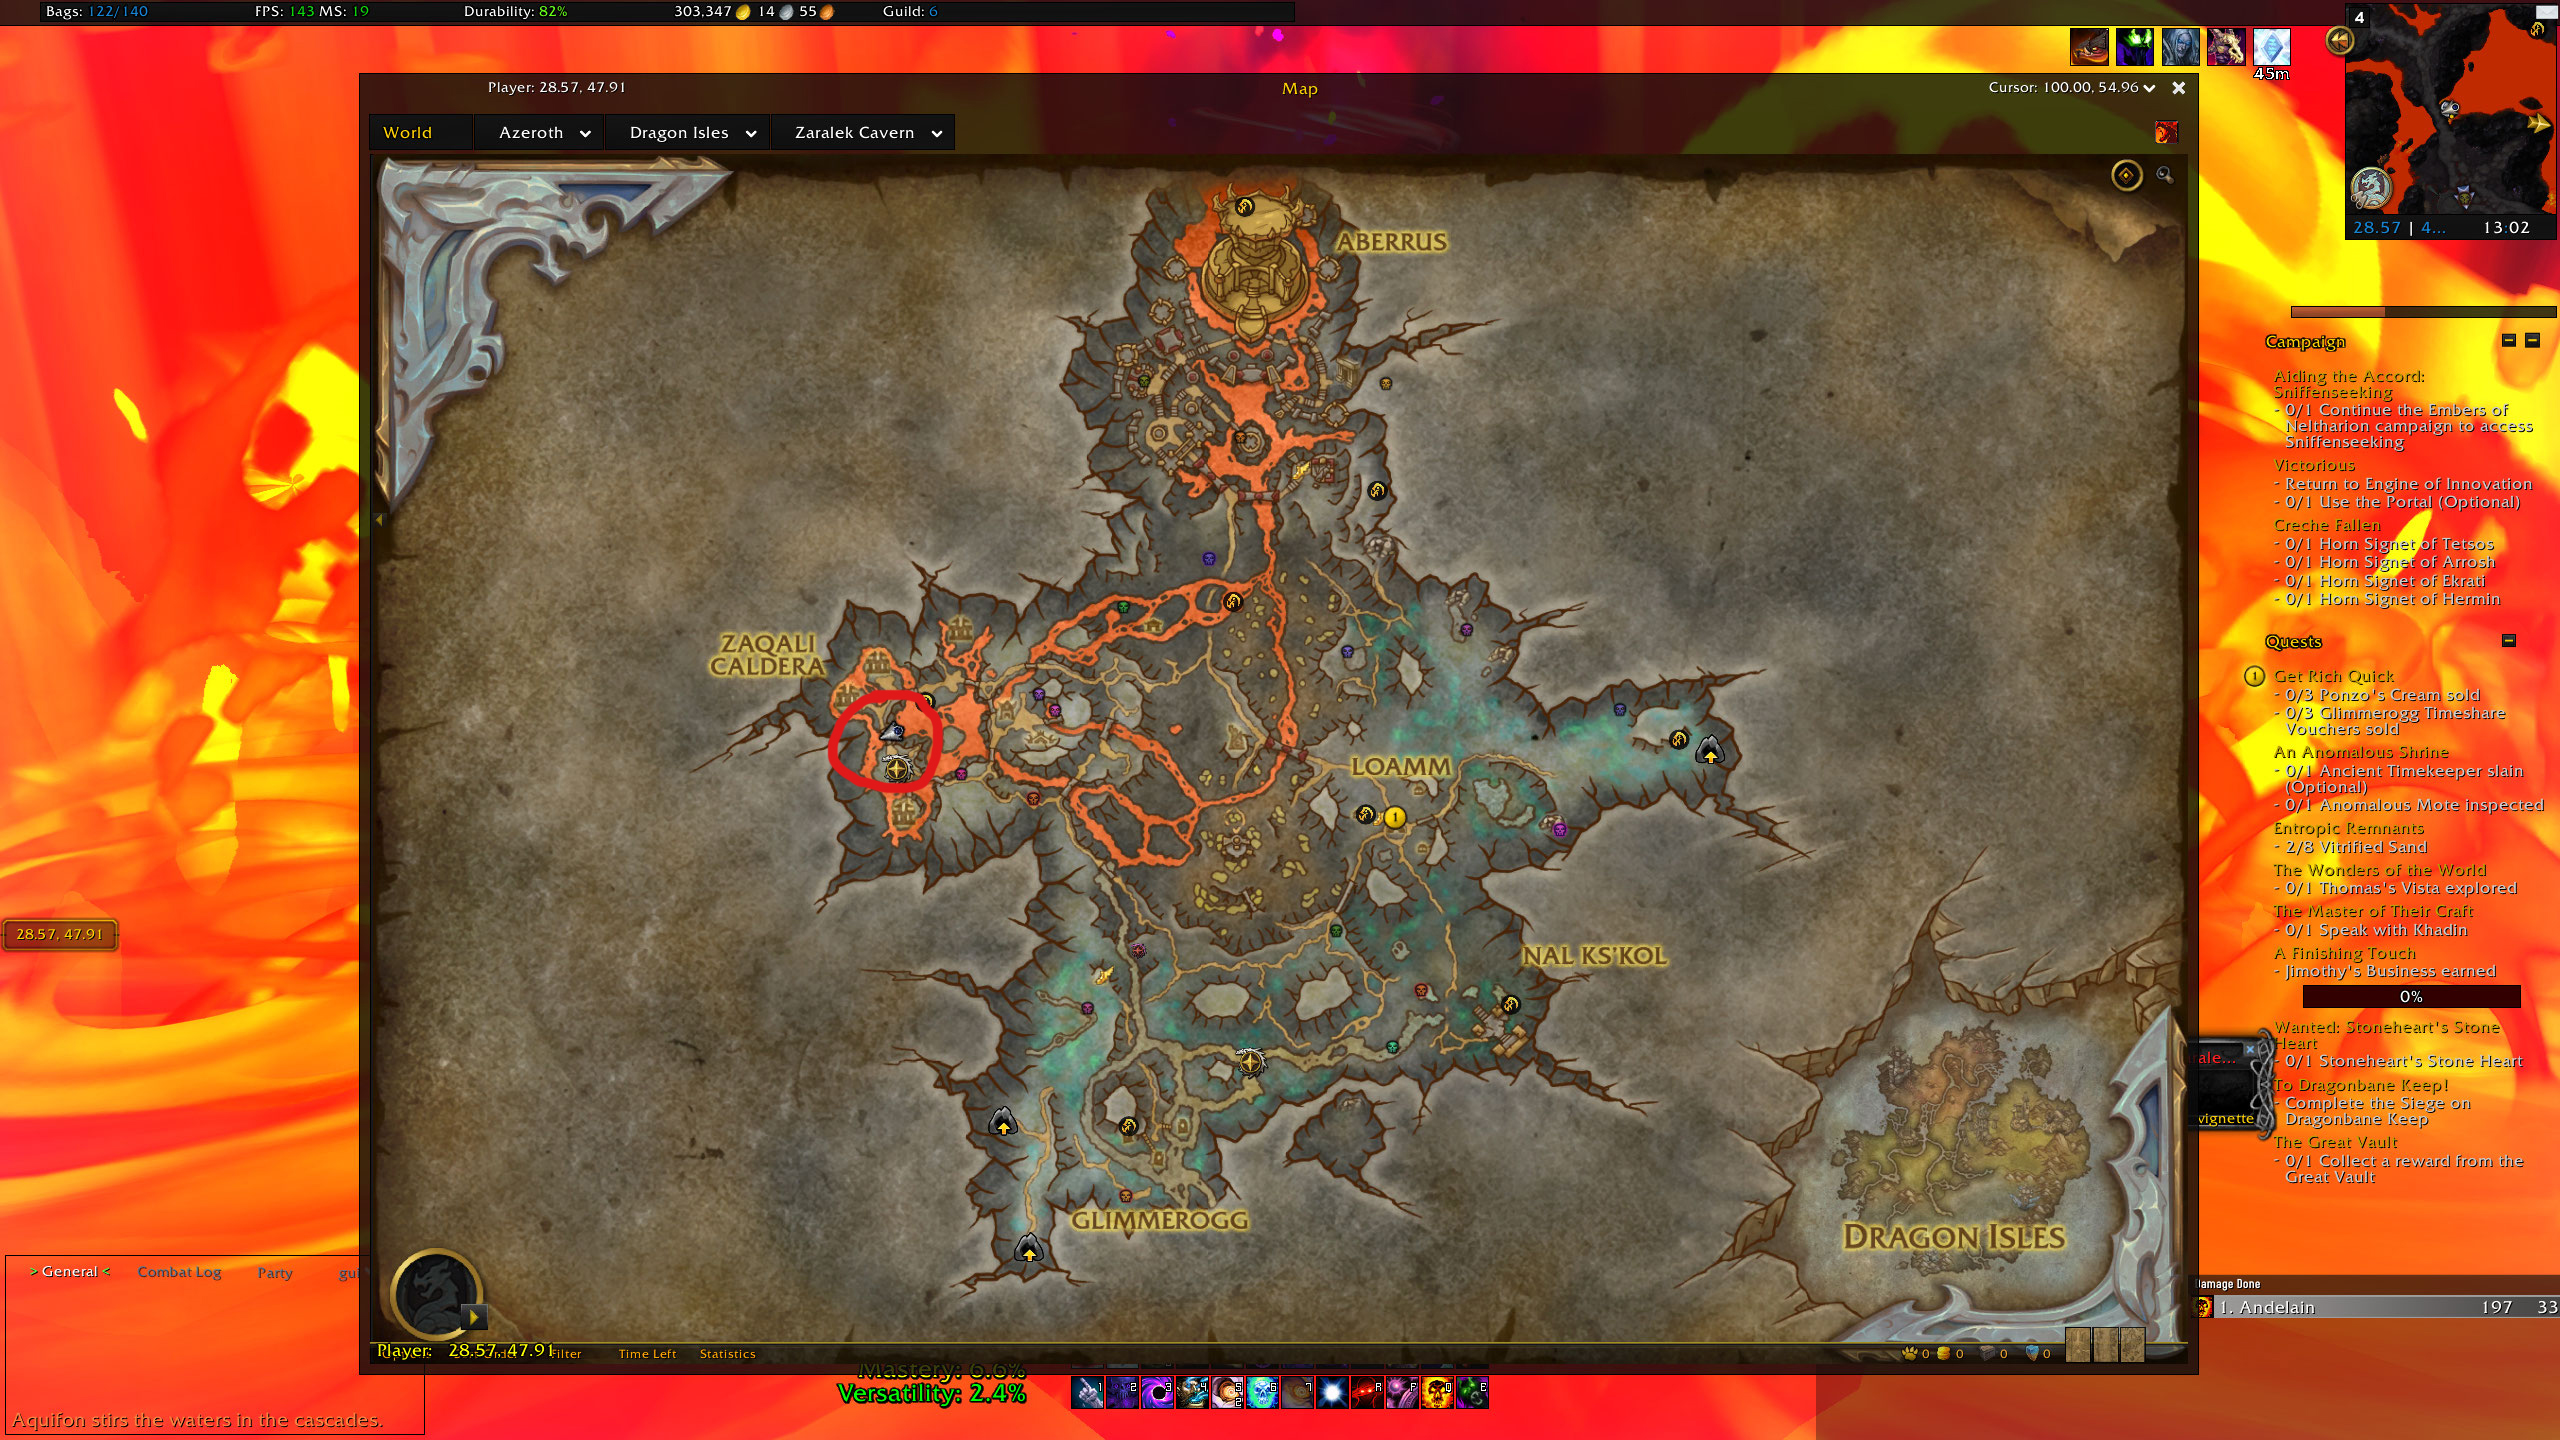 blizzard quietly had world of warcraft players test run the war within's biggest new feature last year: underground zones